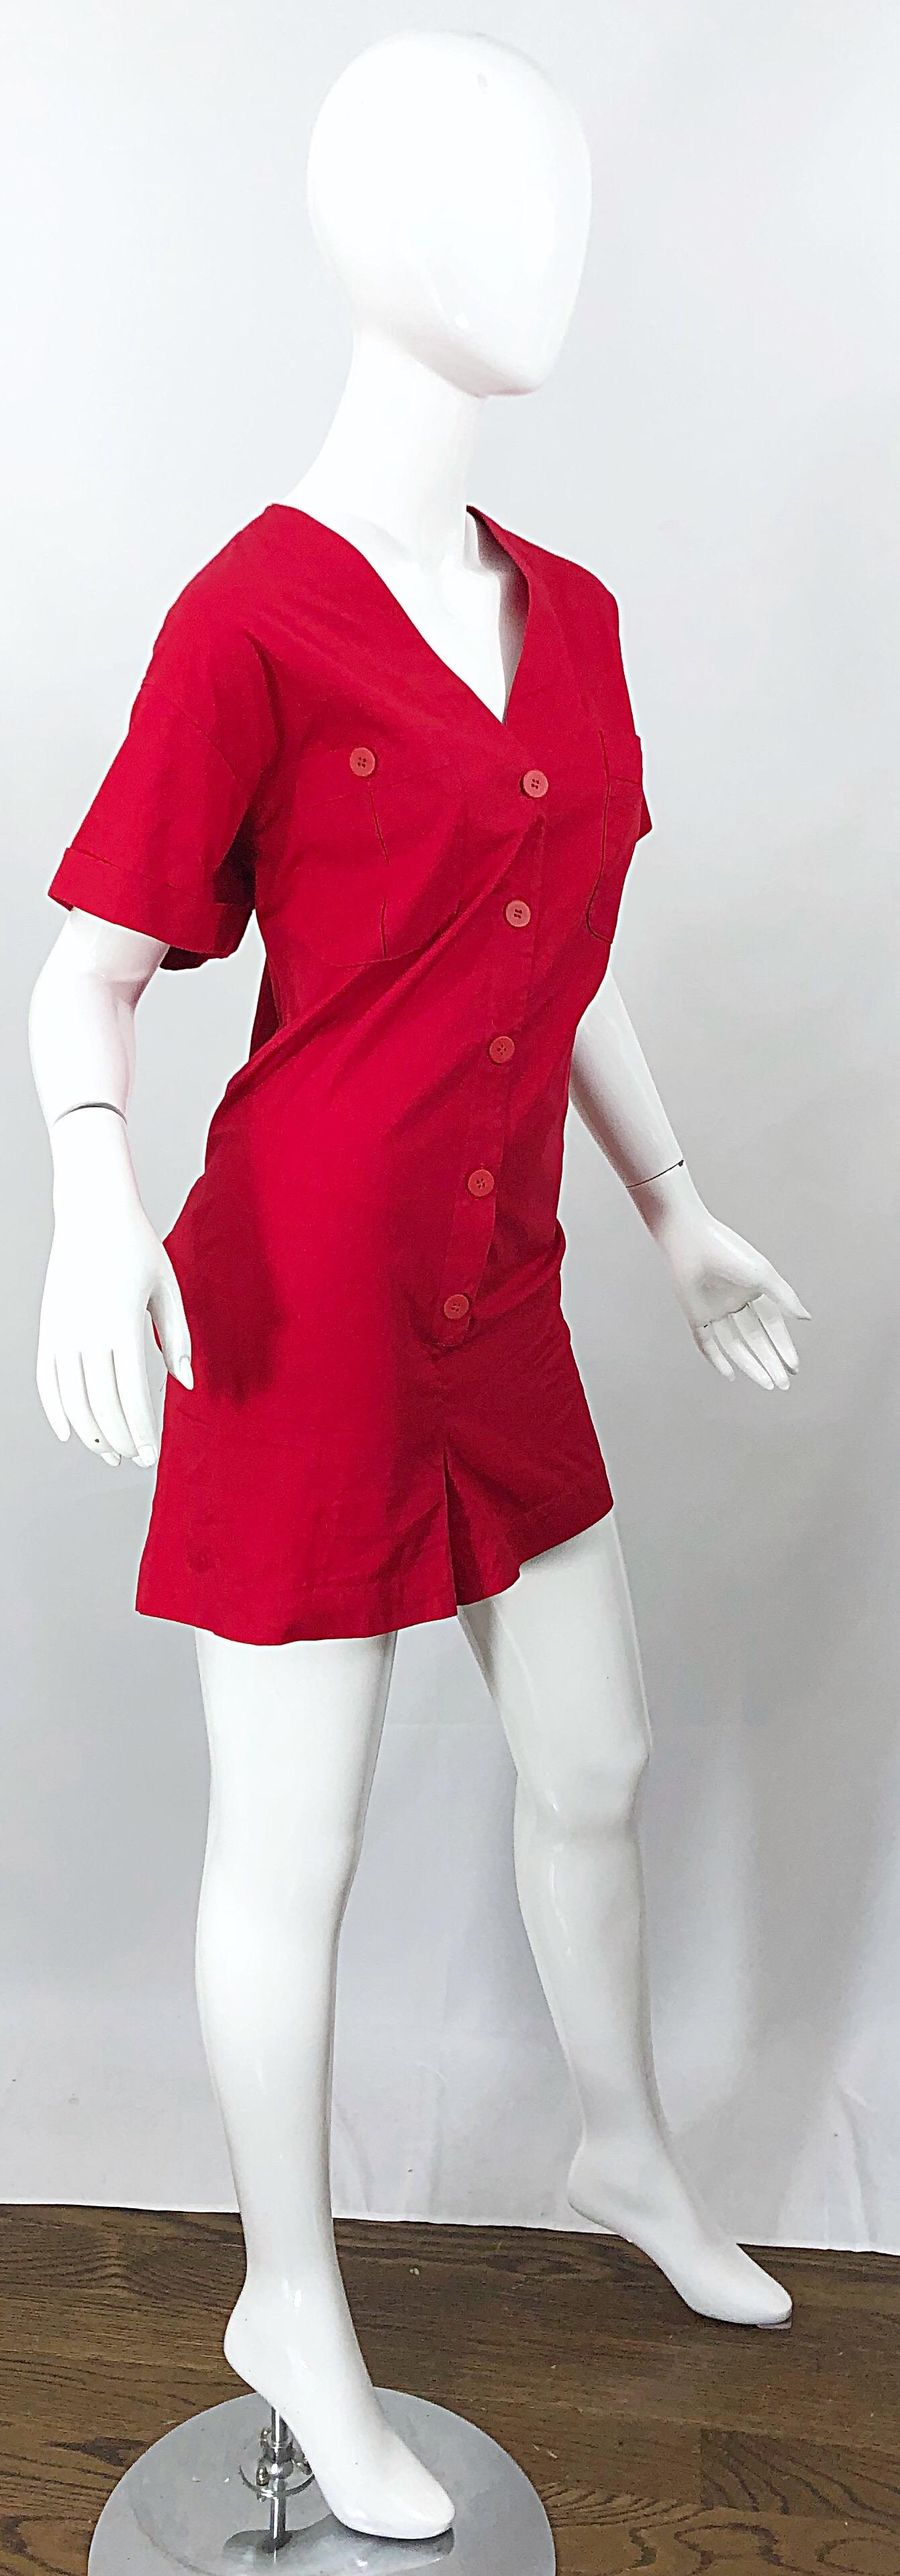 NWT Vintage Christian Dior Romper Size 14 Lipstick Red Cotton One Piece Jumpsuit For Sale 2